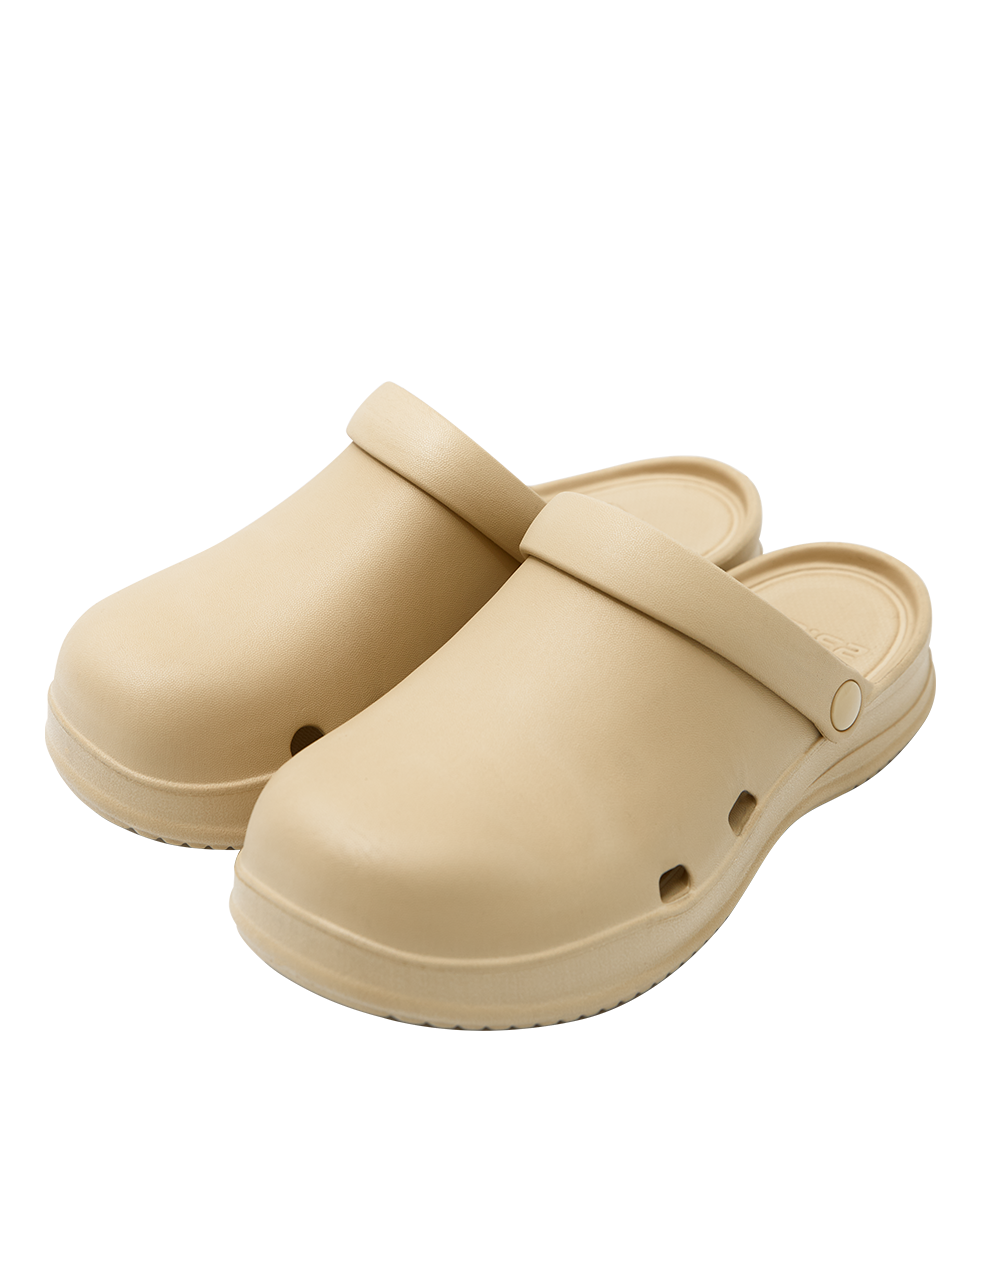 23.65 Bisbee Rubber Mules Camel Butter